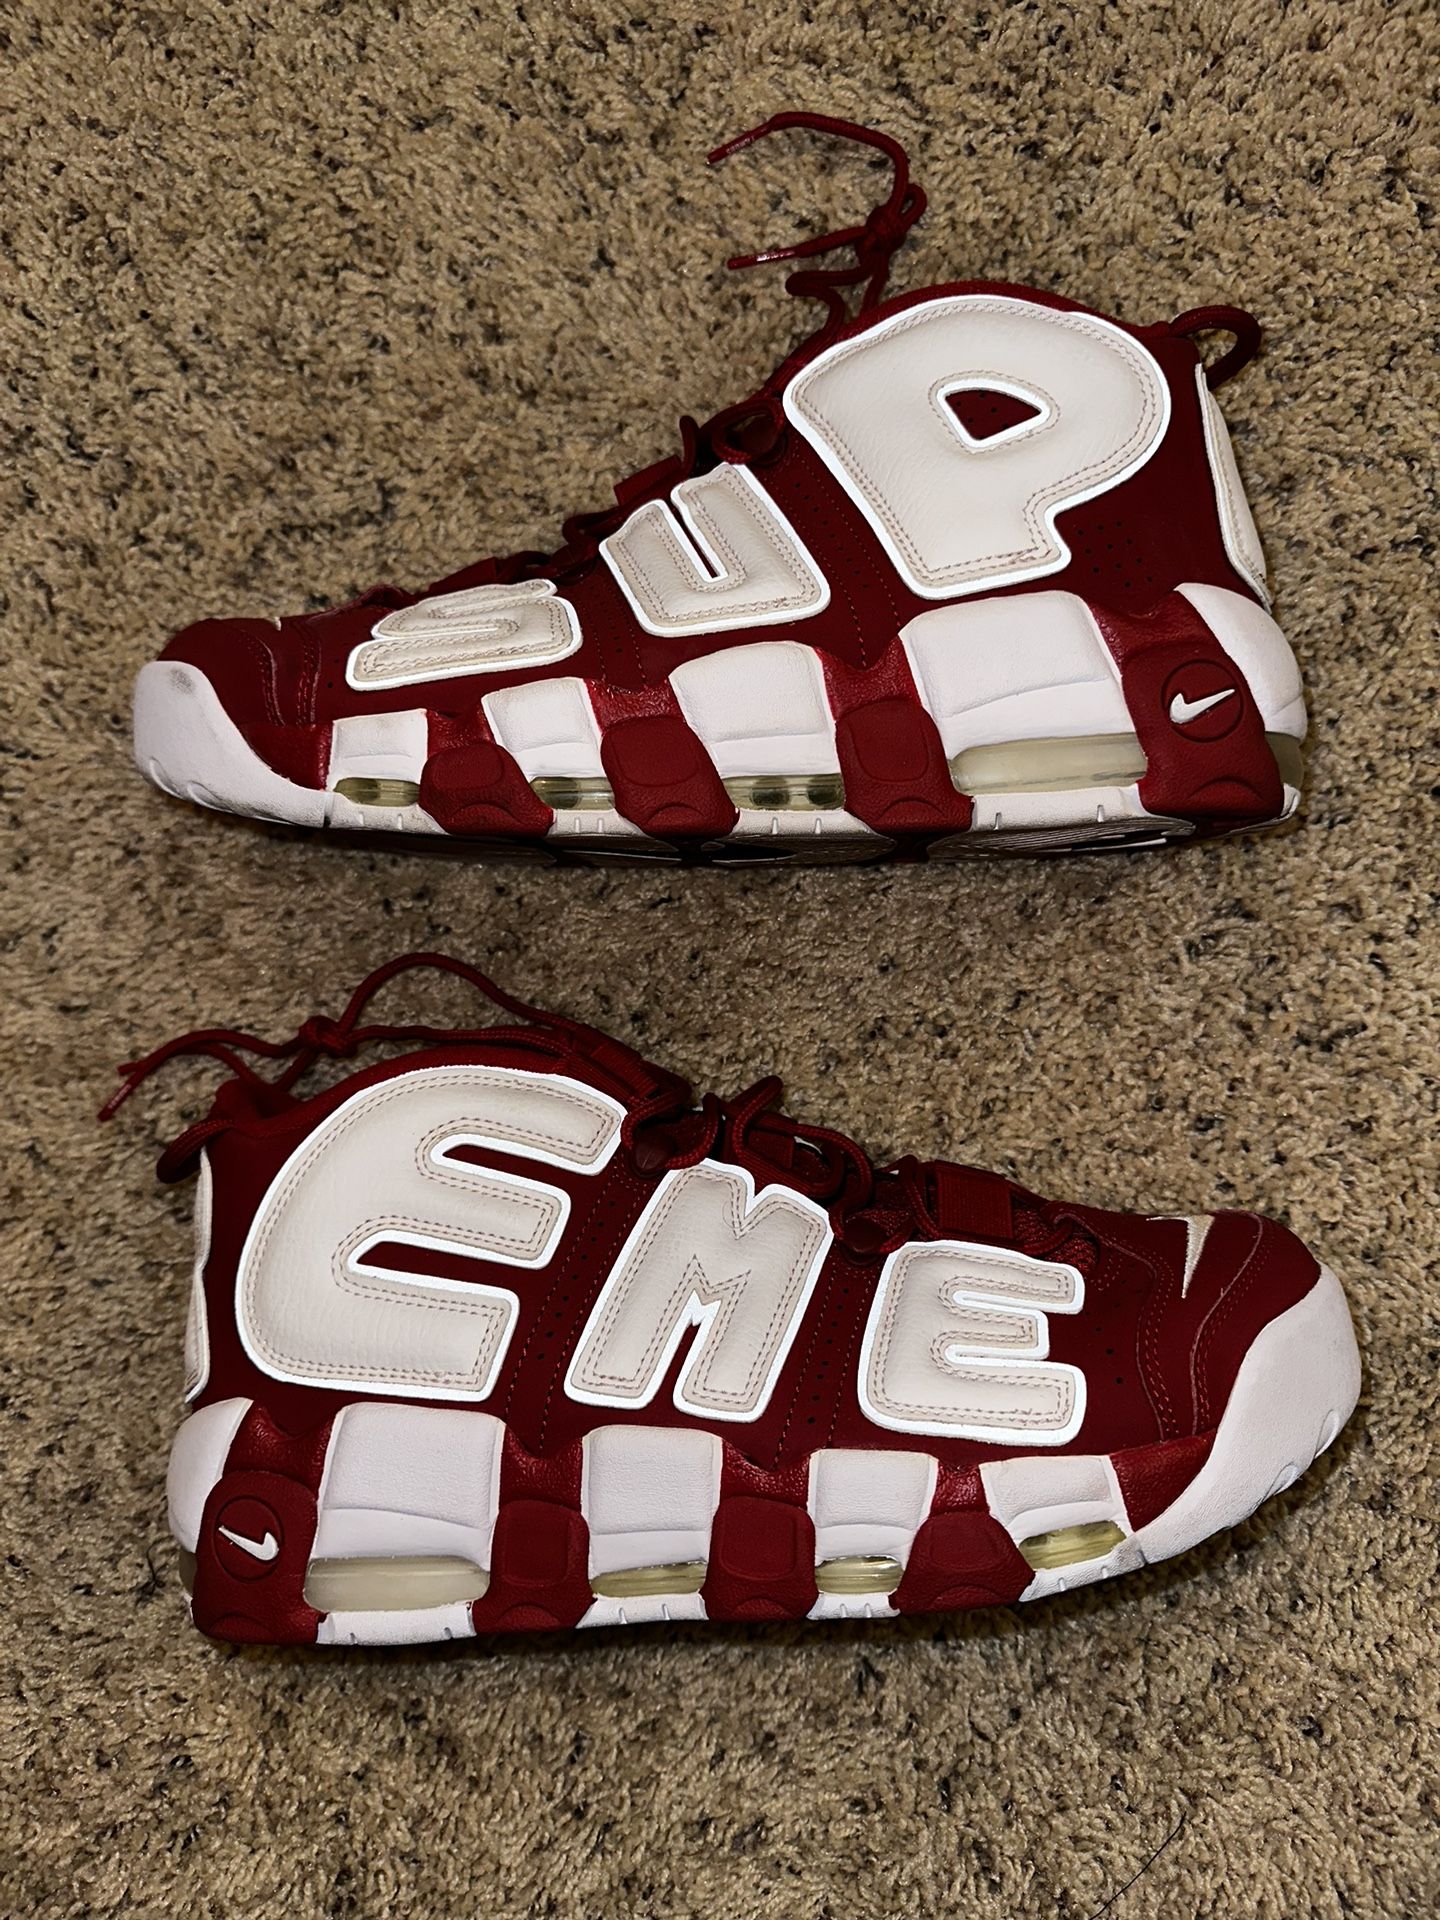 Nike Air Uptempo Supreme Red Size 11